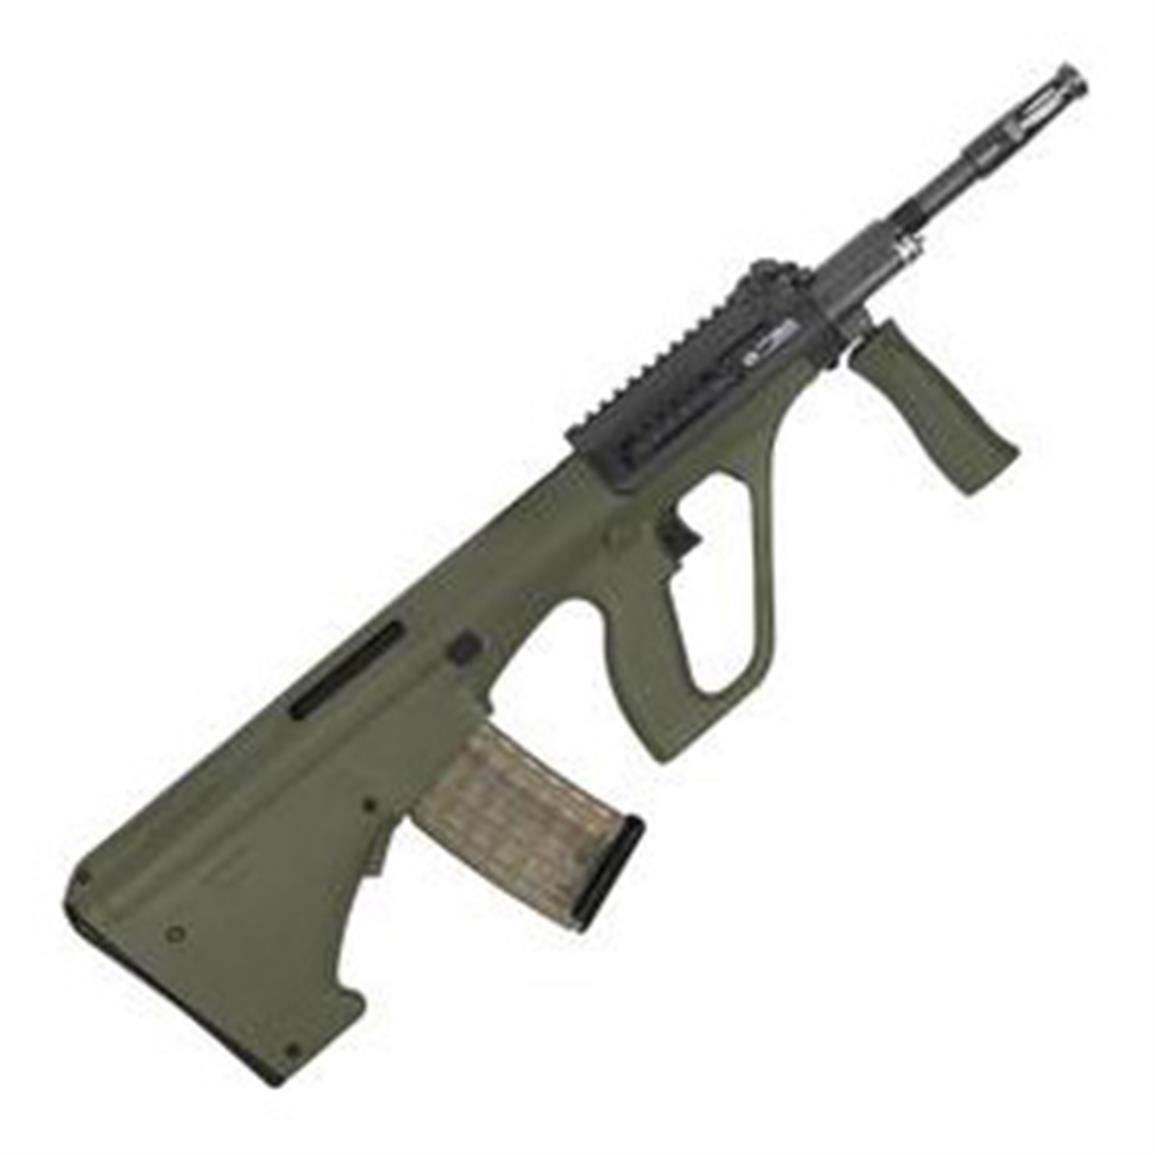 Steyr Arms AUG A3 M1, Semi-Automatic, 5.56x45mm NATO, 16" Barrel, 30+1 Rounds